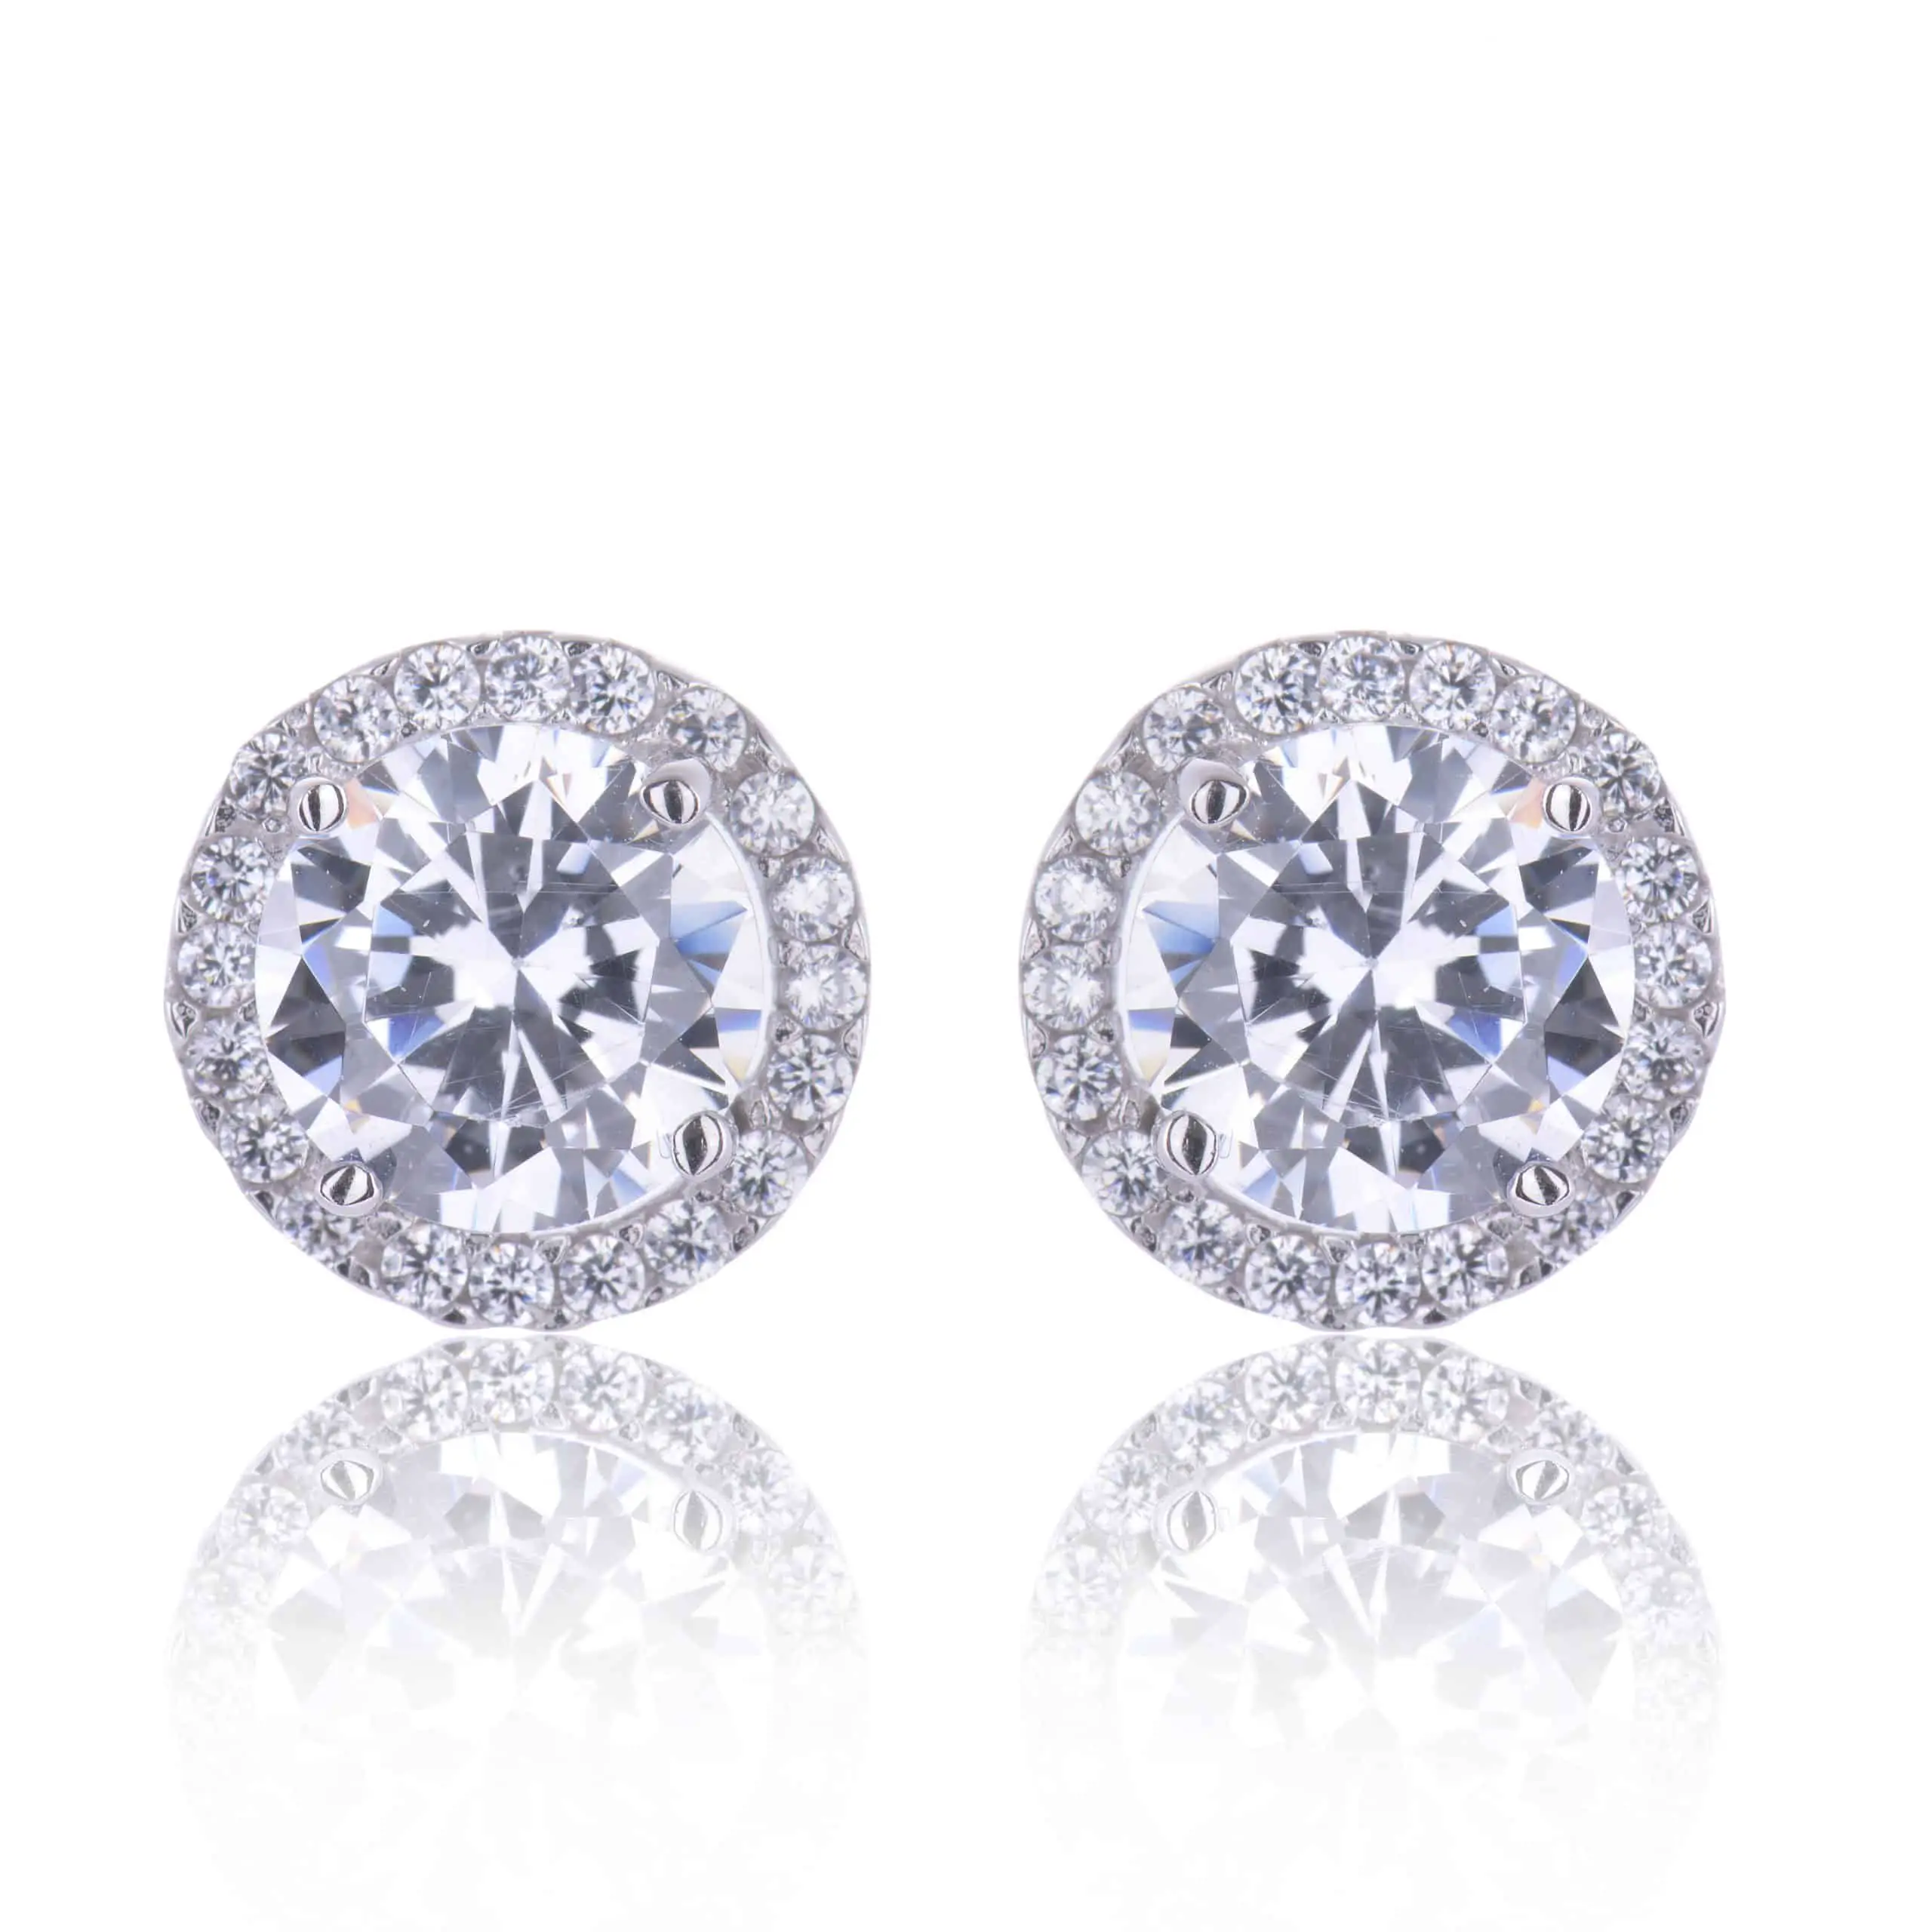 9ct White Gold Brilliant Cut Cubic Zirconia Halo Stud Earrings